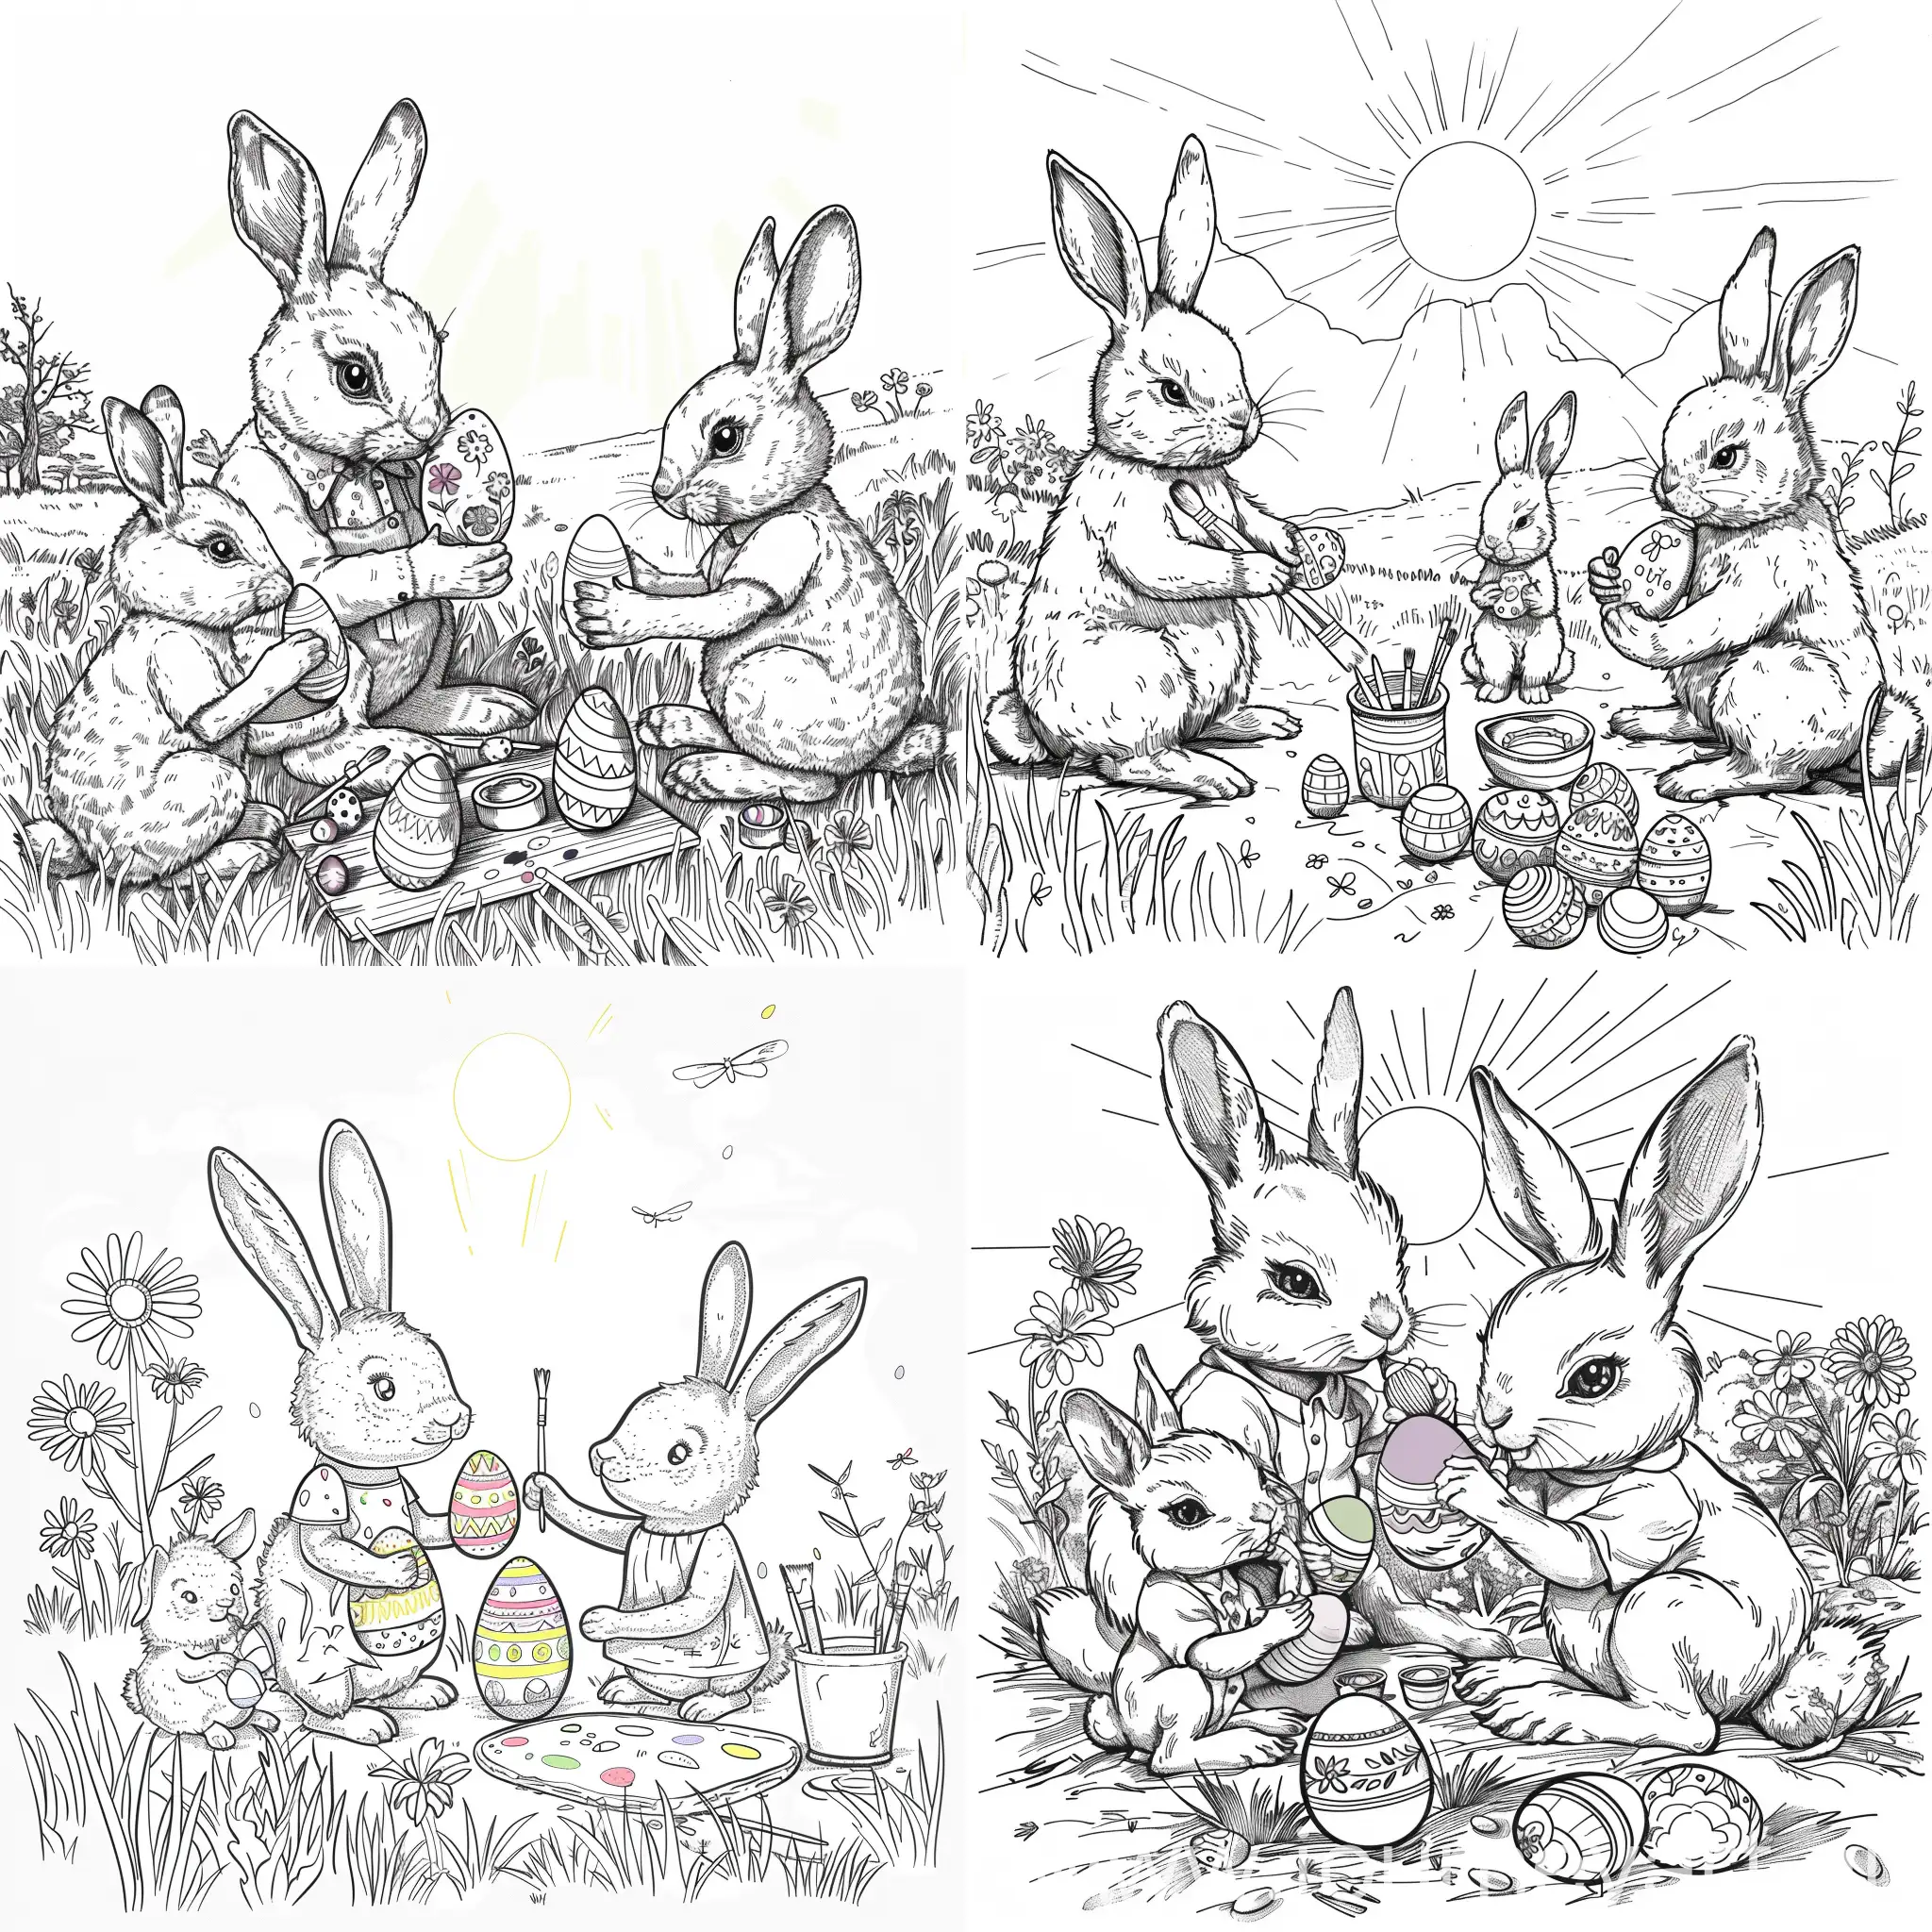 Bunny-Family-Painting-Colorful-Easter-Eggs-in-Sunlit-Meadow